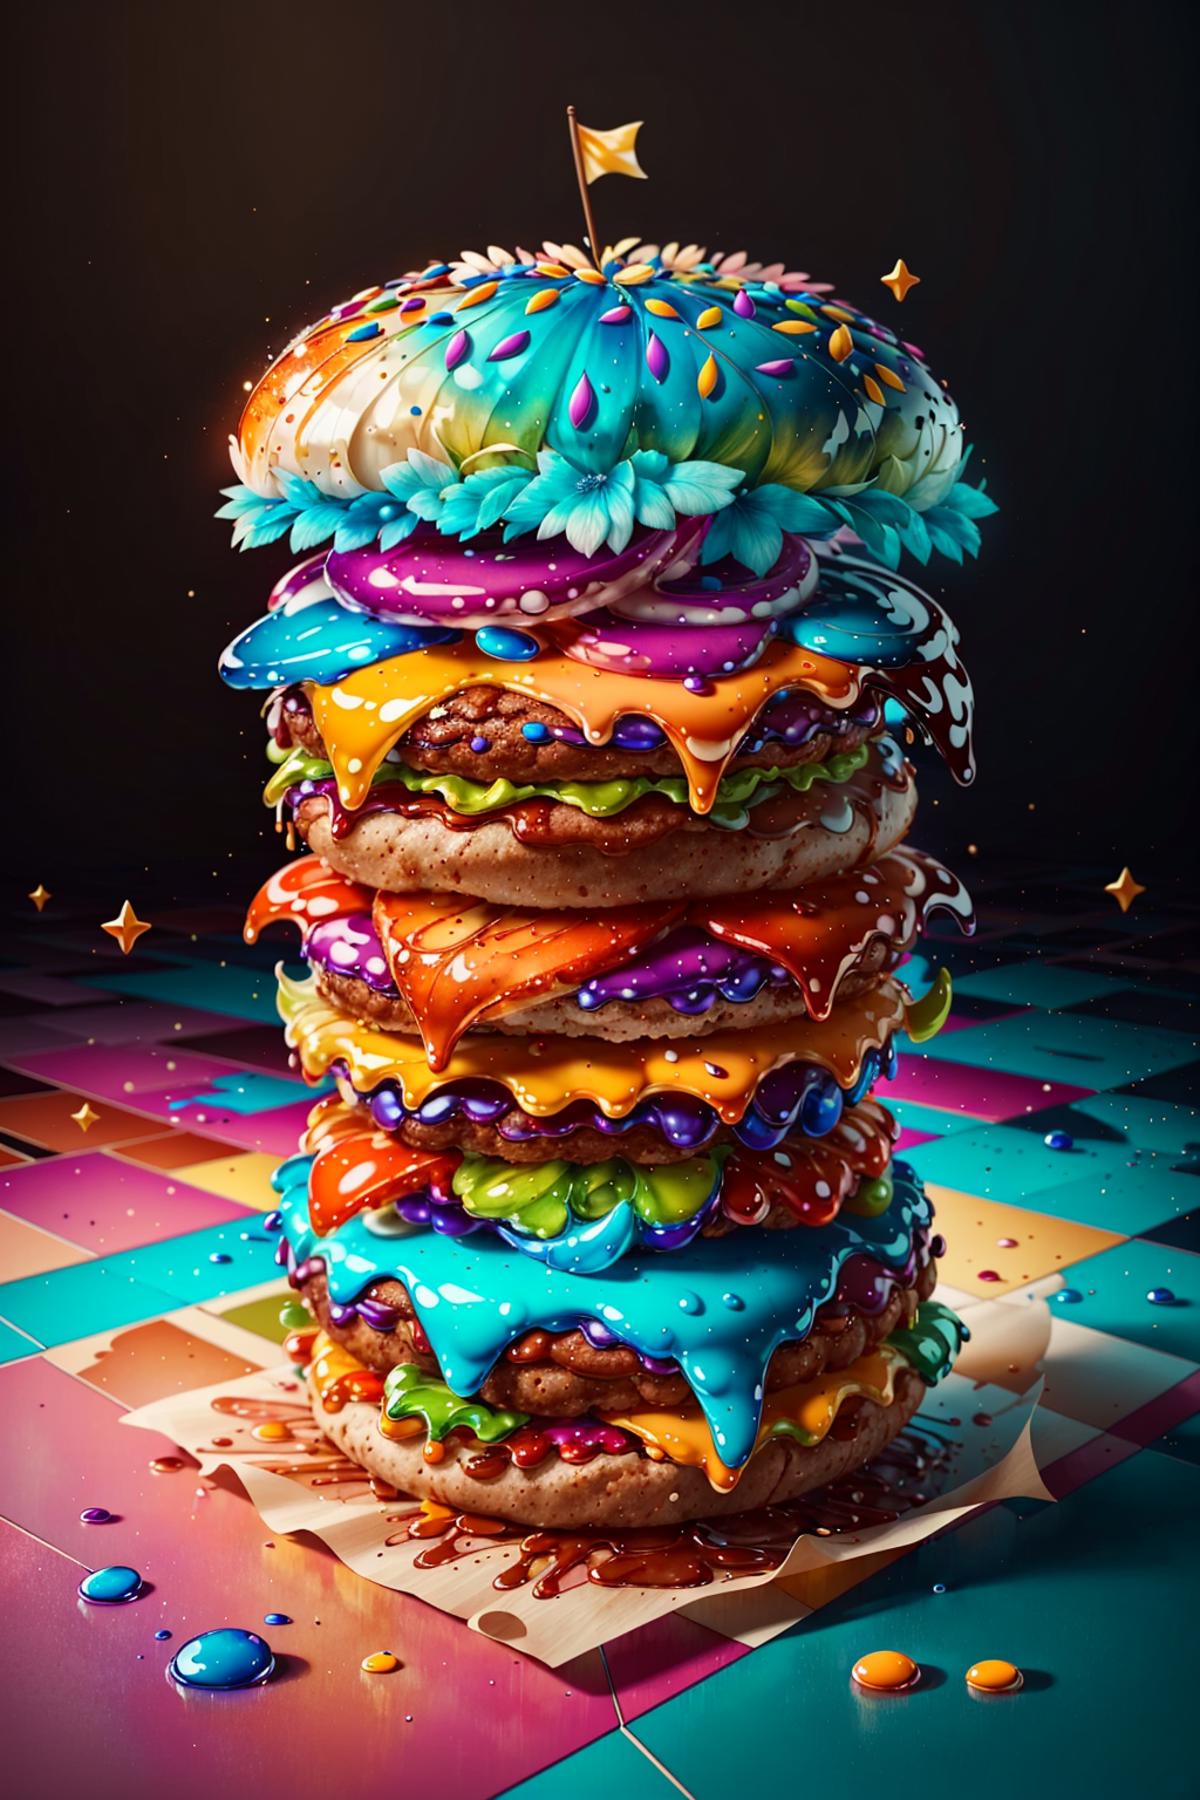 Artistic and colorful stack of donuts and sandwiches.